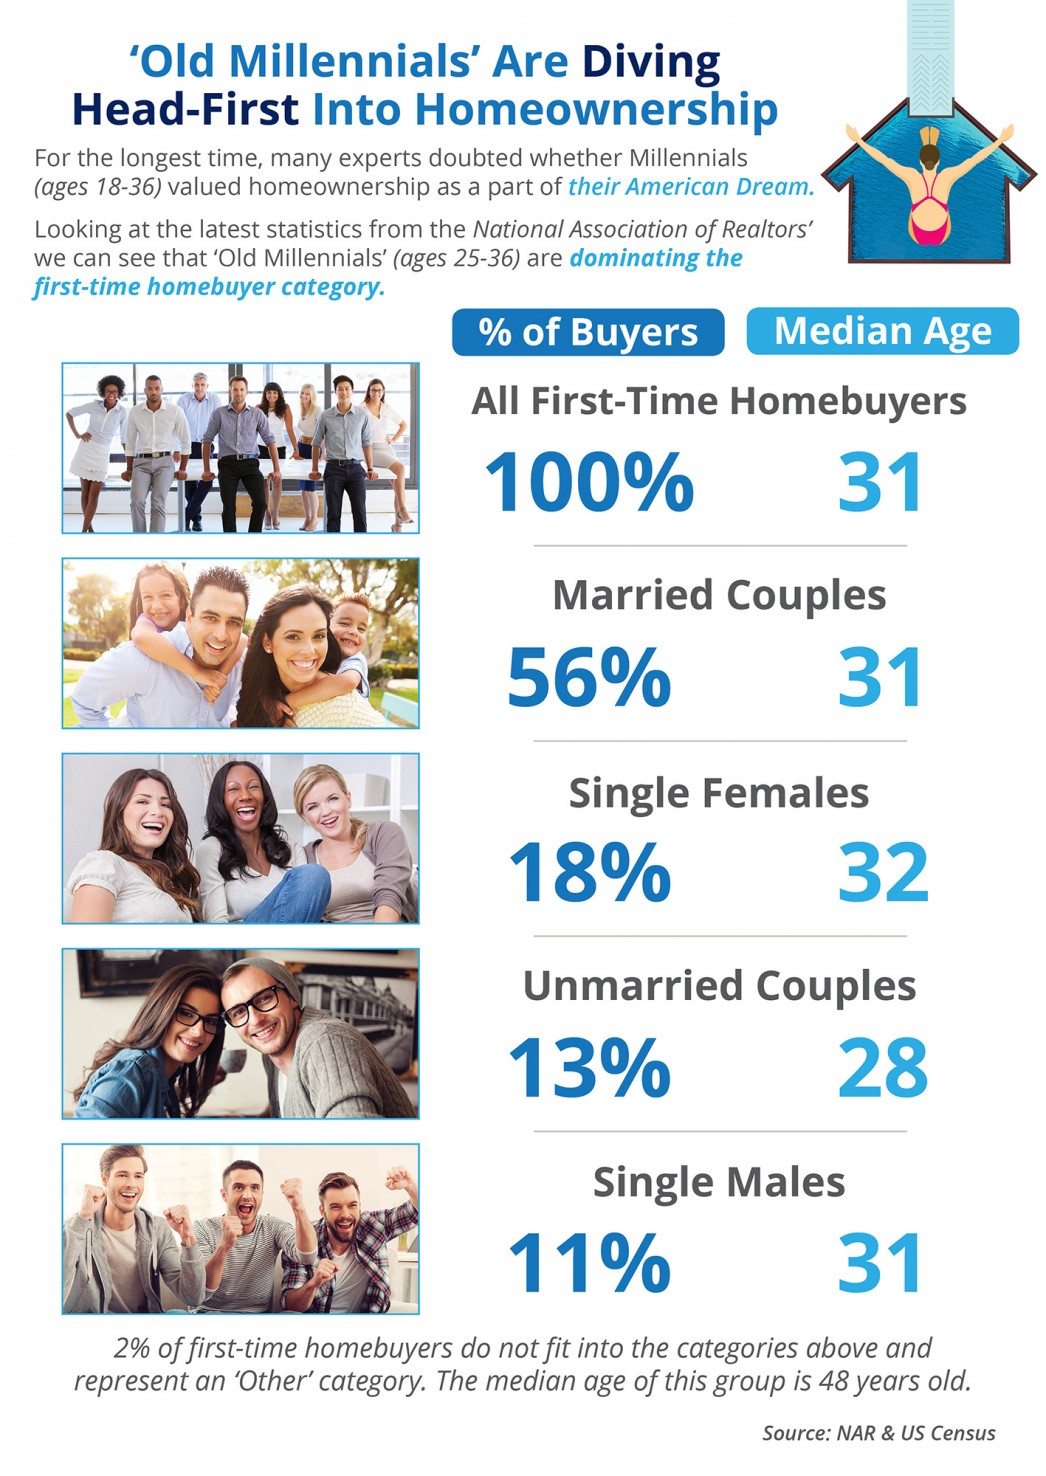 ‘Old Millennials’ Are Diving Head-First into Homeownership [INFOGRAPHIC] | MyKCM